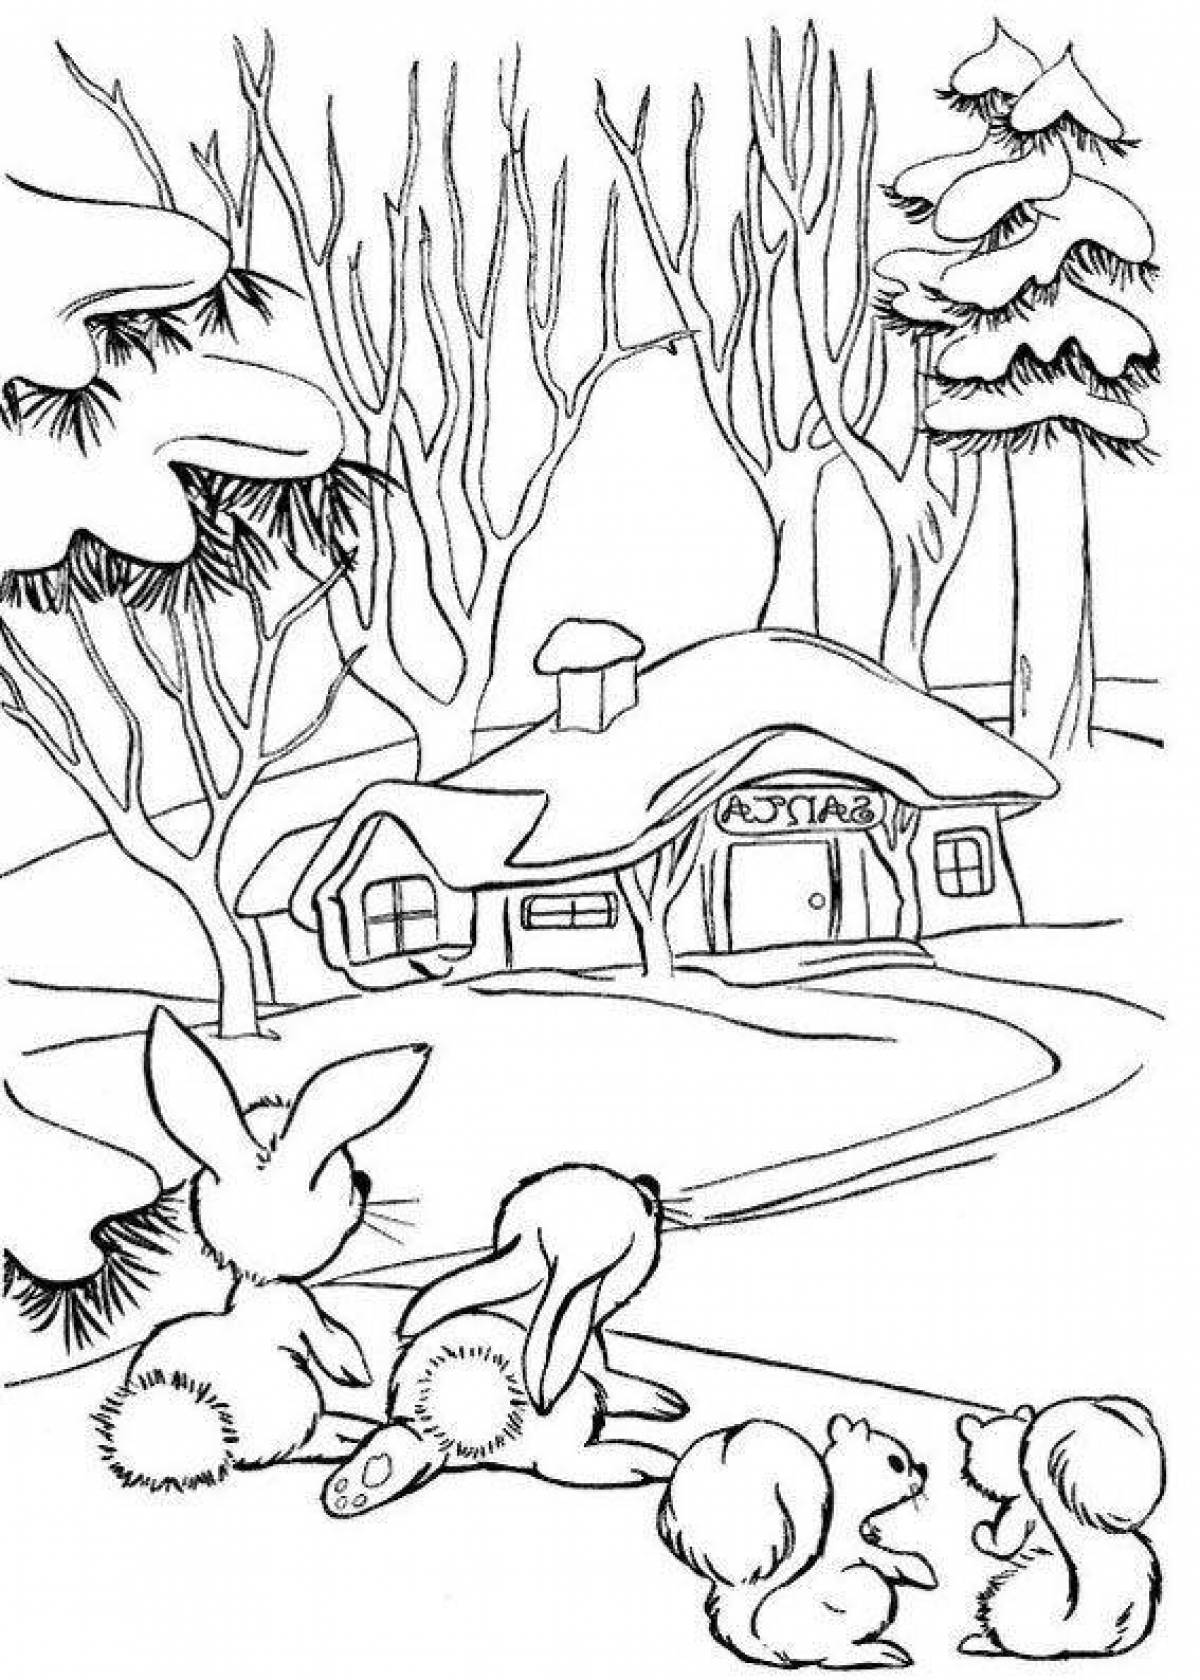 Flawless winter in the forest coloring book